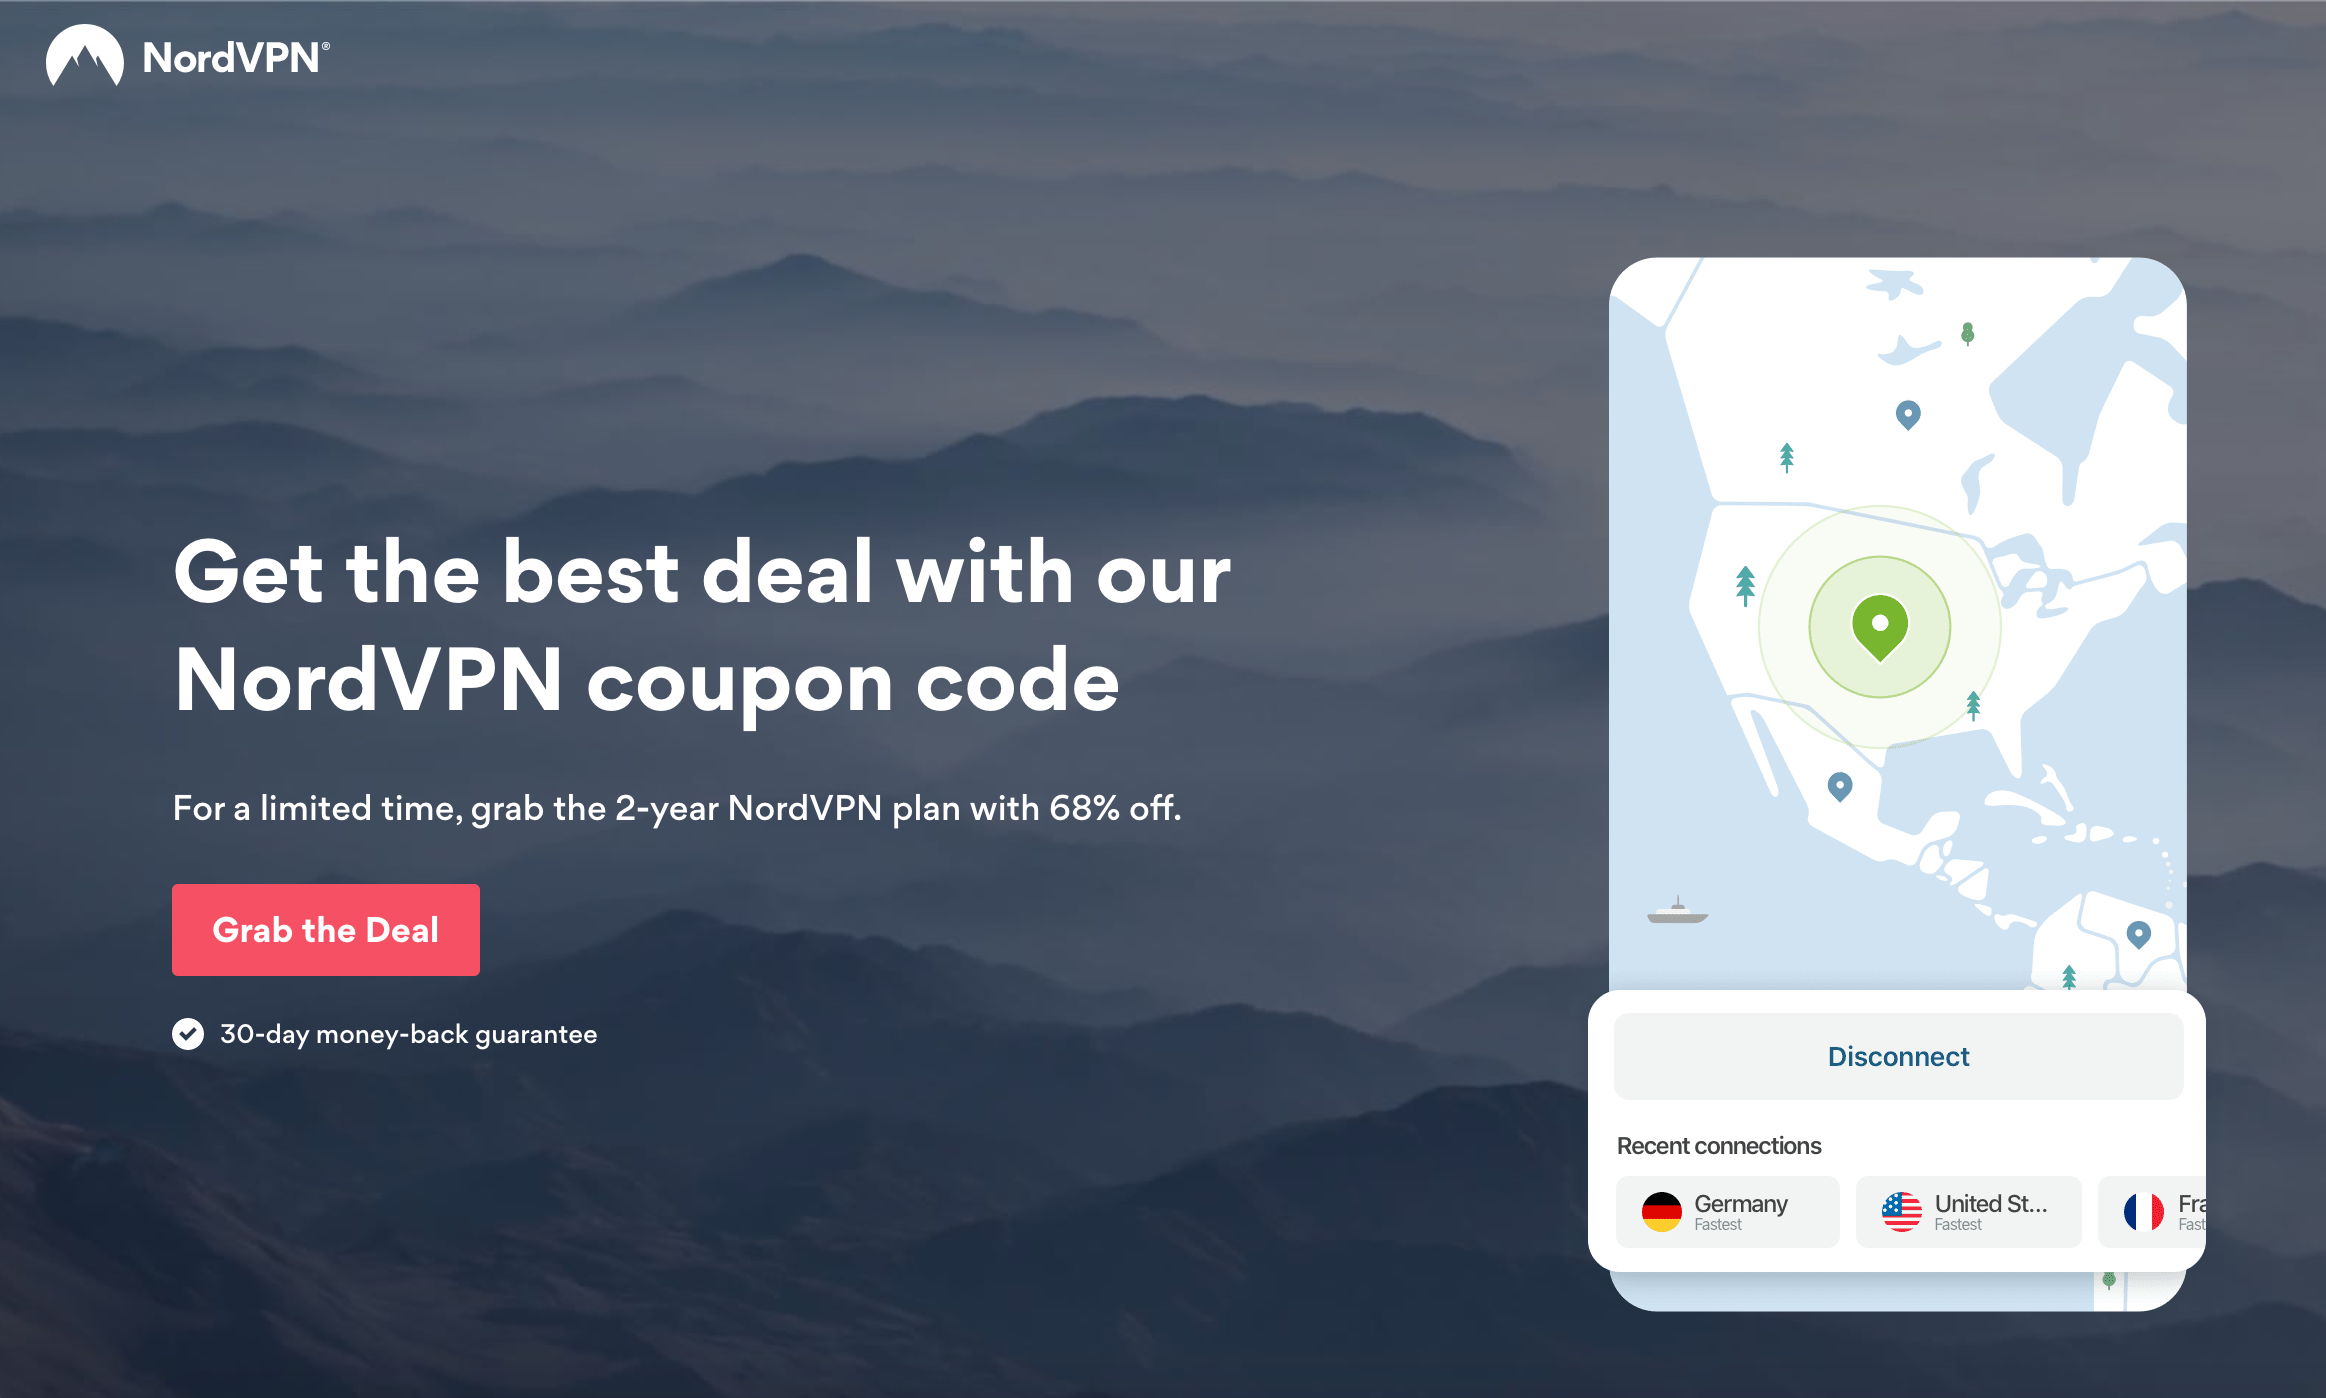 NordVPN and Tipsfromgeeks offer an exclusive coupon code for 65% OFF